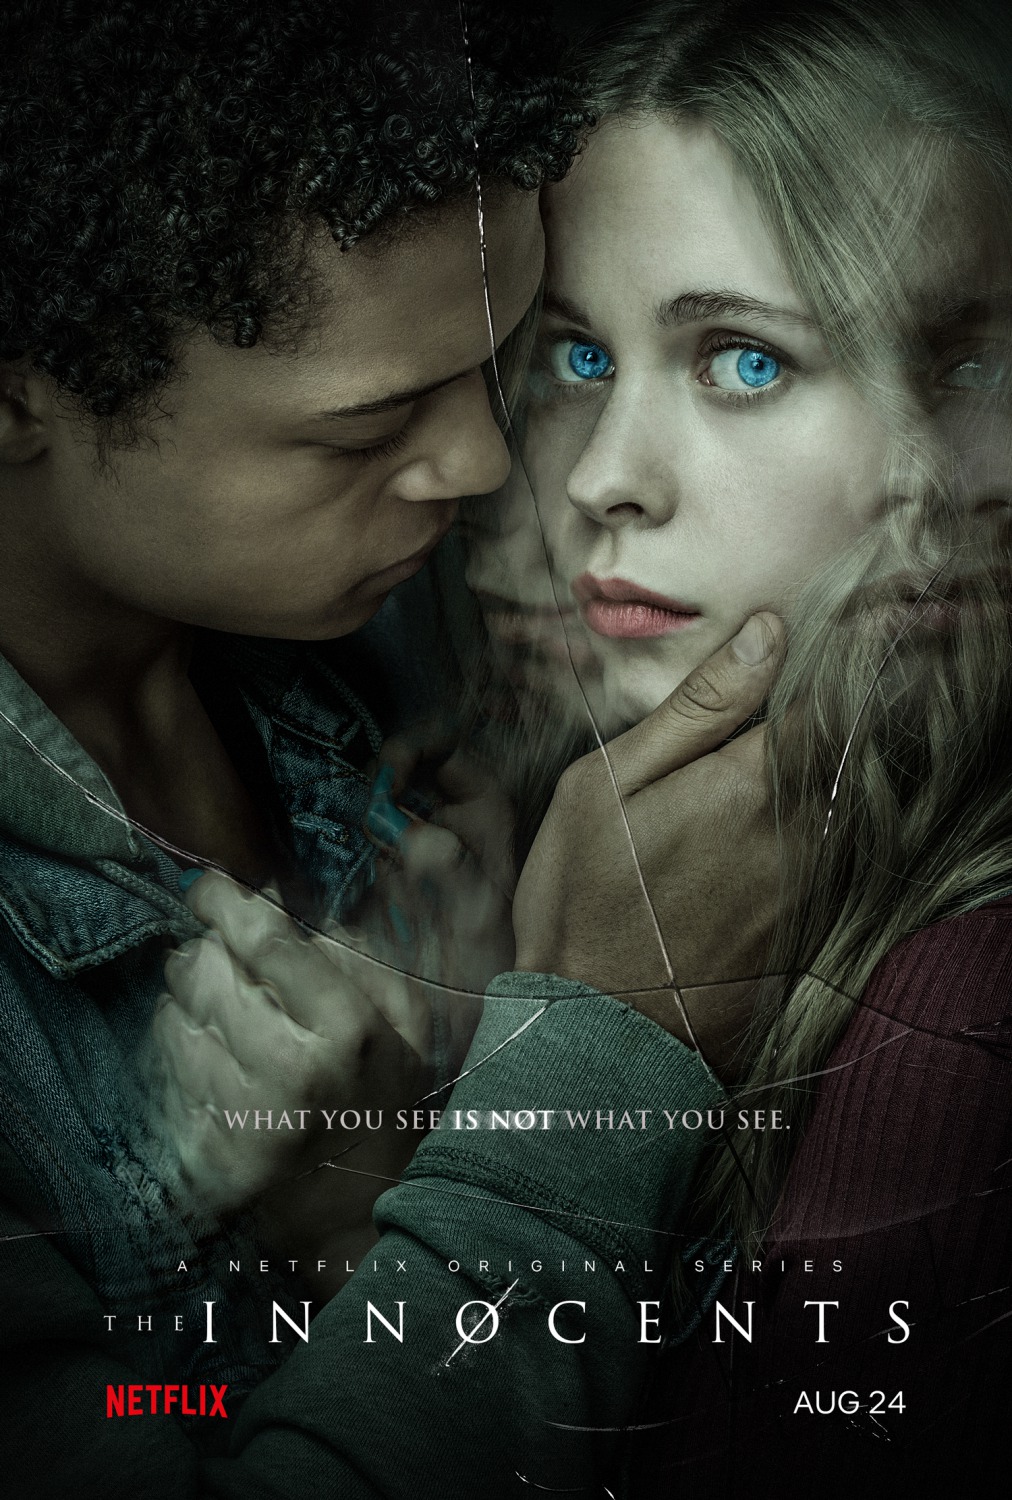 Extra Large TV Poster Image for The Innocents (#1 of 2)